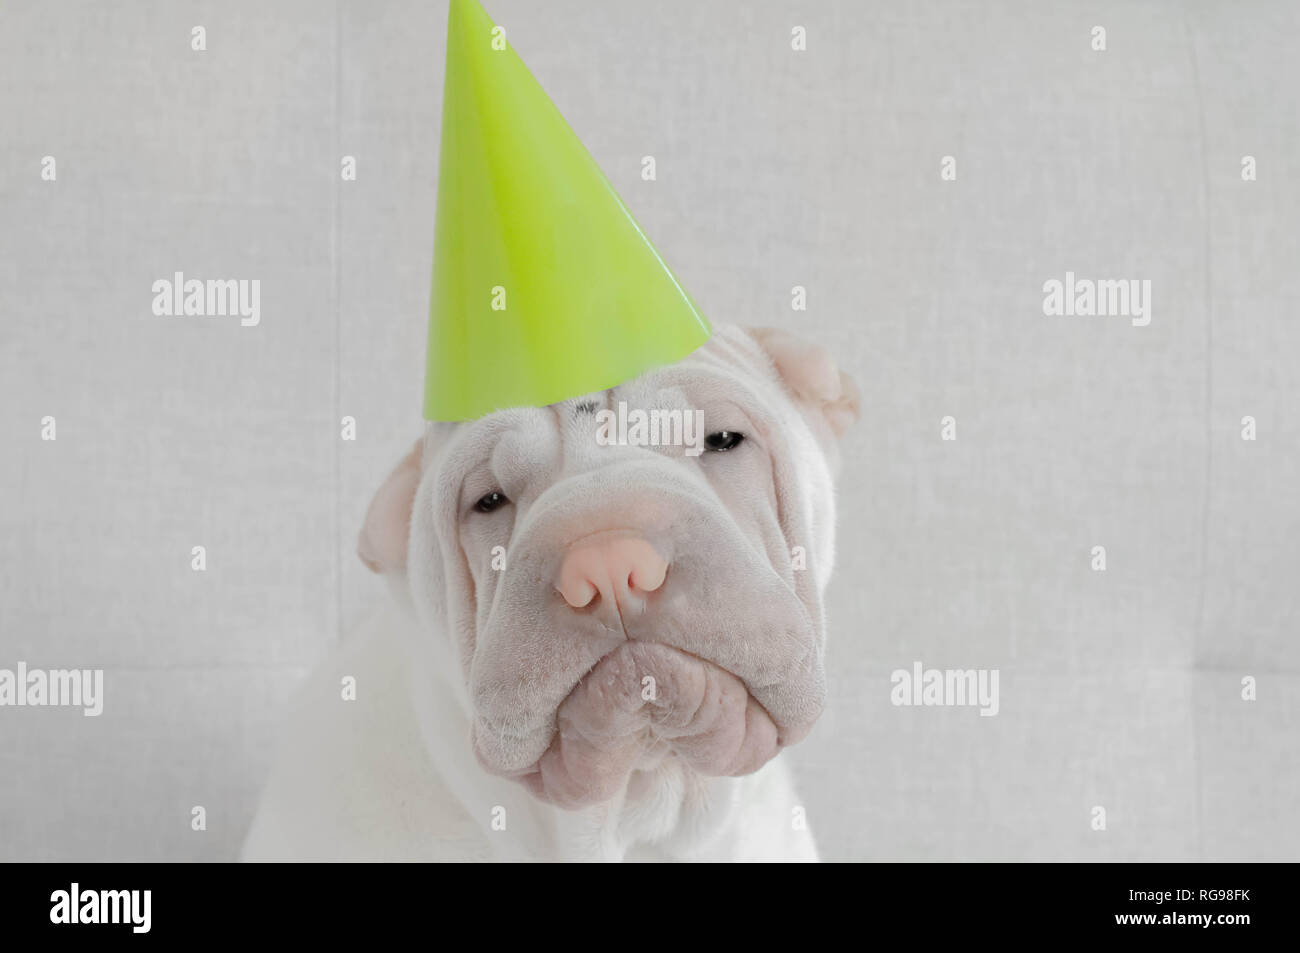 Shar-pei puppy dog wearing a party hat Banque D'Images